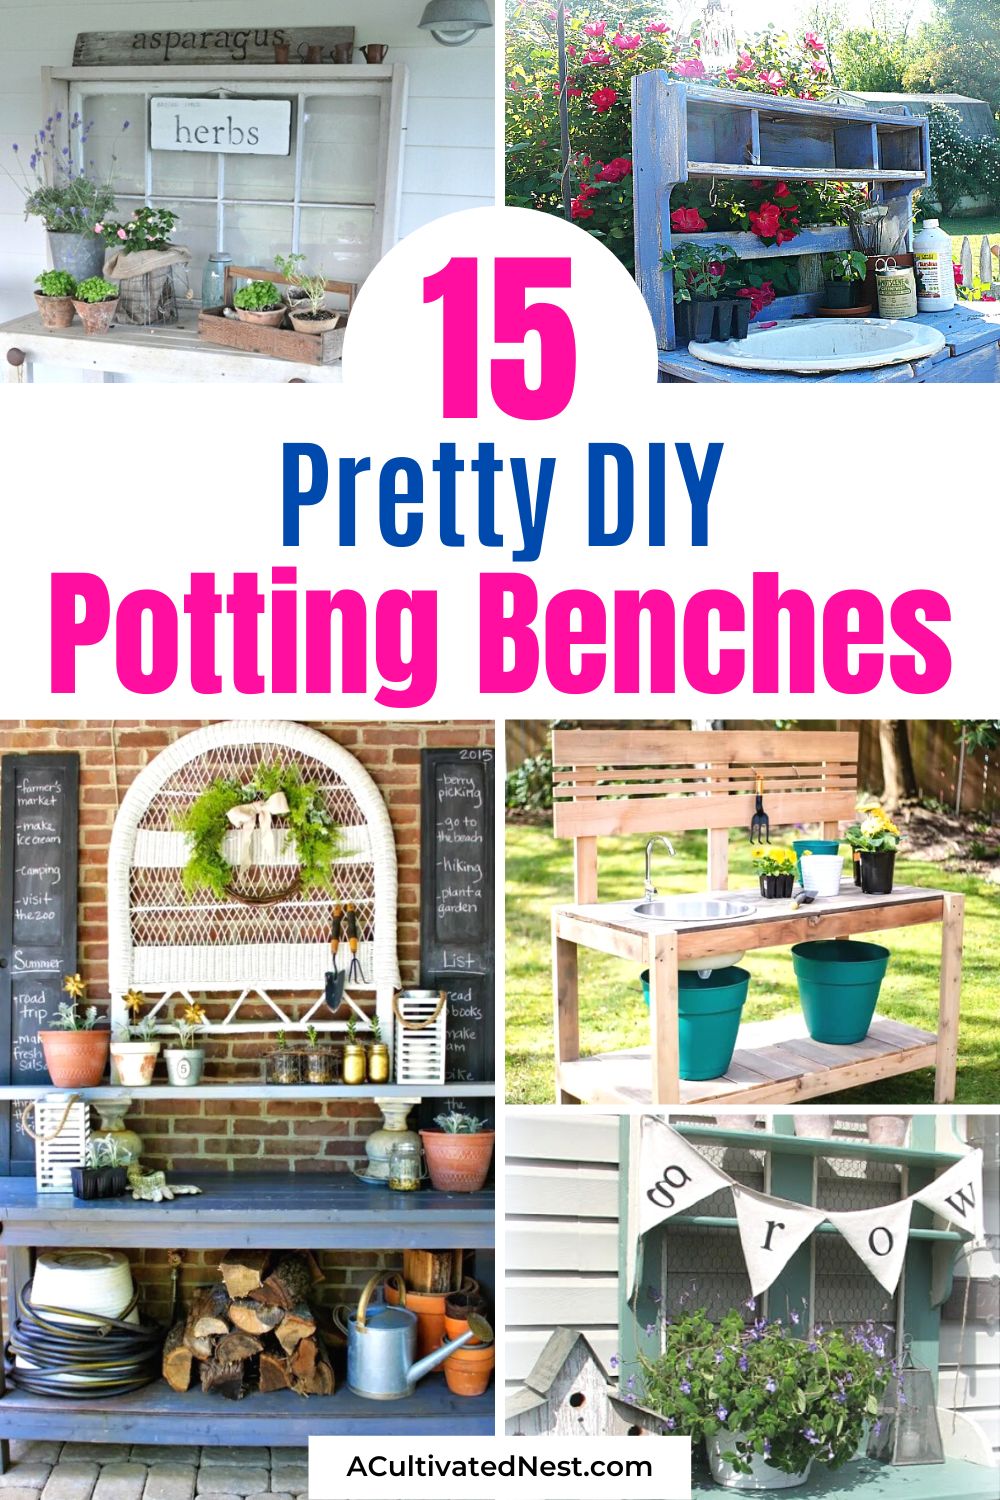 15 Pretty DIY Potting Bench Ideas- Looking for a new DIY project for your garden? Check out these stunning DIY potting bench ideas! From rustic and charming to sleek and modern, there's a design to suit every style. Get ready to transform your outdoor space with these inspiring ideas! | #gardenDIY #gardening #pottingBench #diyProjects #ACultivatedNest